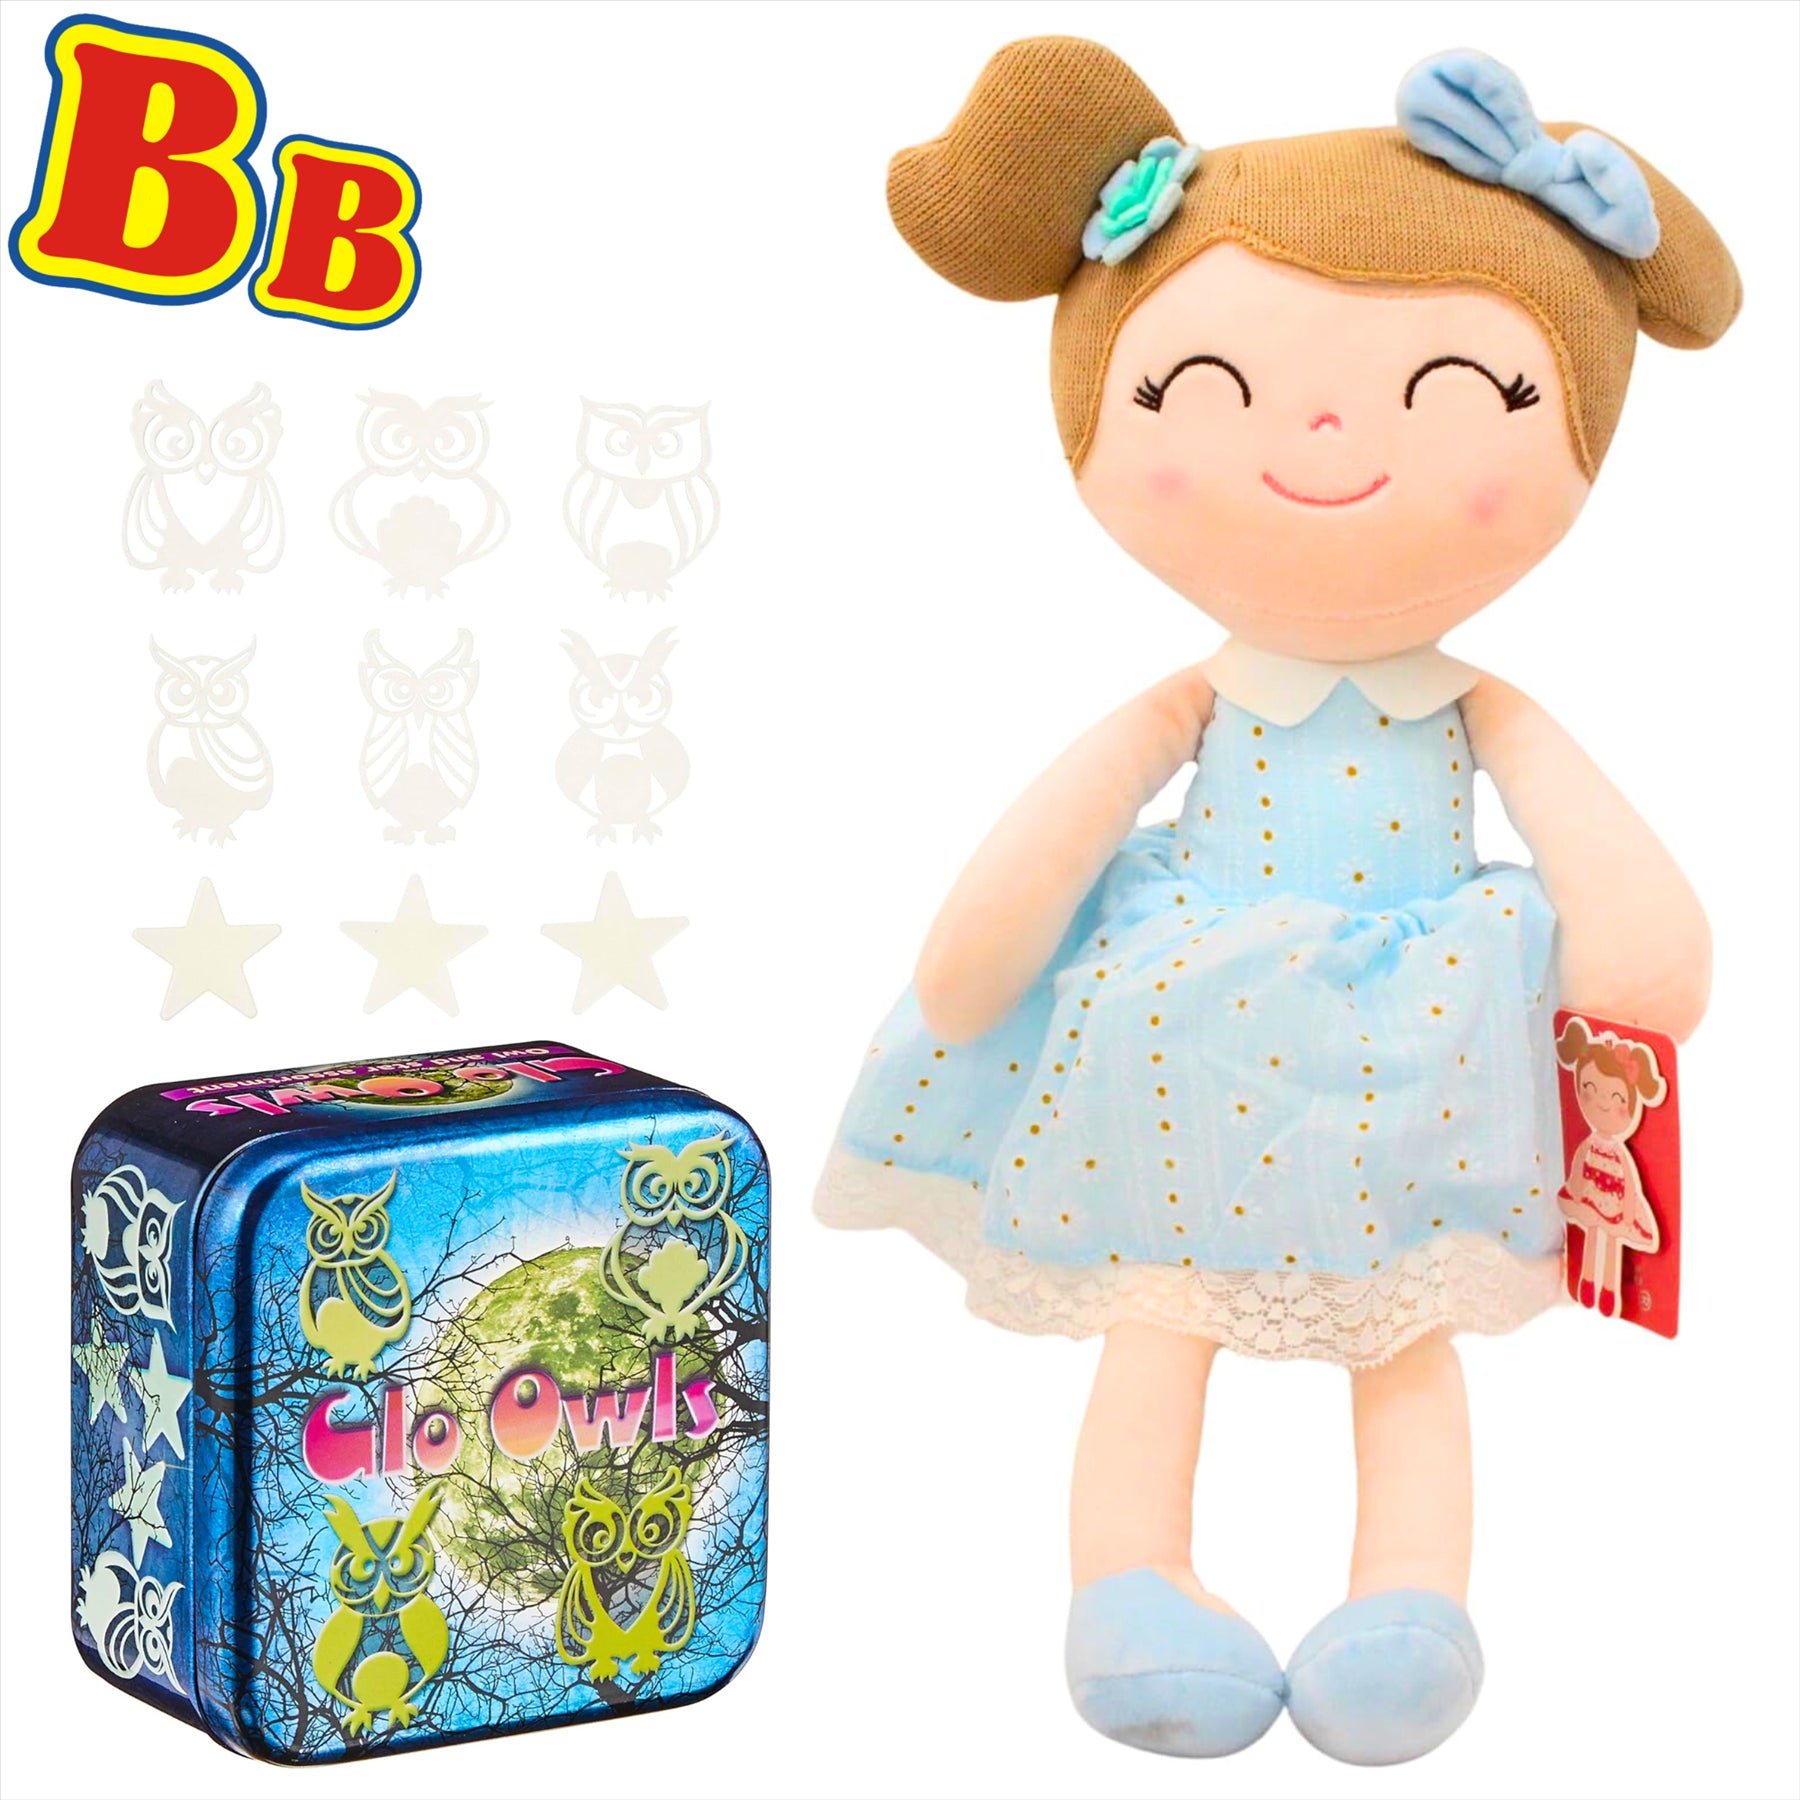 Gloveleya Super Soft Embroidered Blue Daisy 40cm Plush Doll with 42 Glow in the Dark Owls and Stars - Toptoys2u